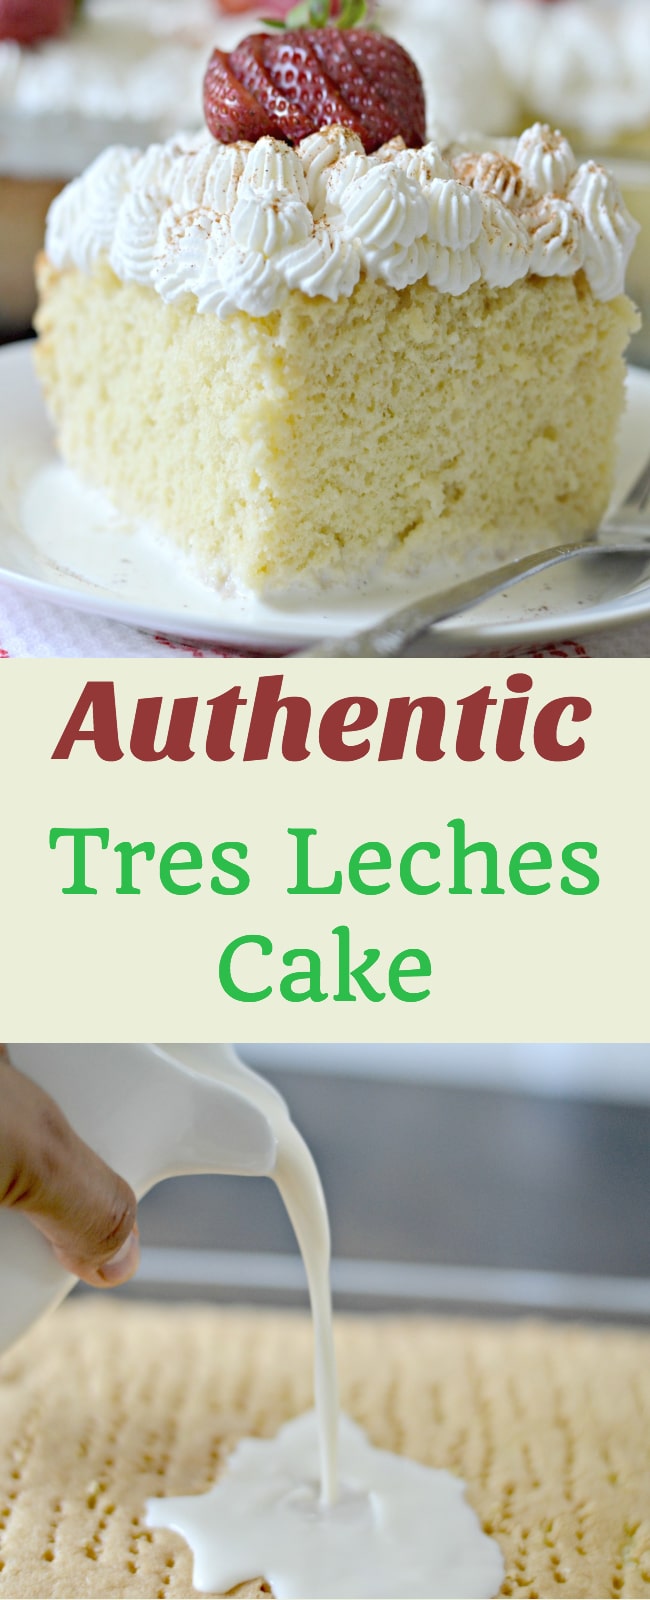 Tres Leches cake is an authentic Mexican dessert that is full of delicious flavor and perfect for any party or other gatherings.